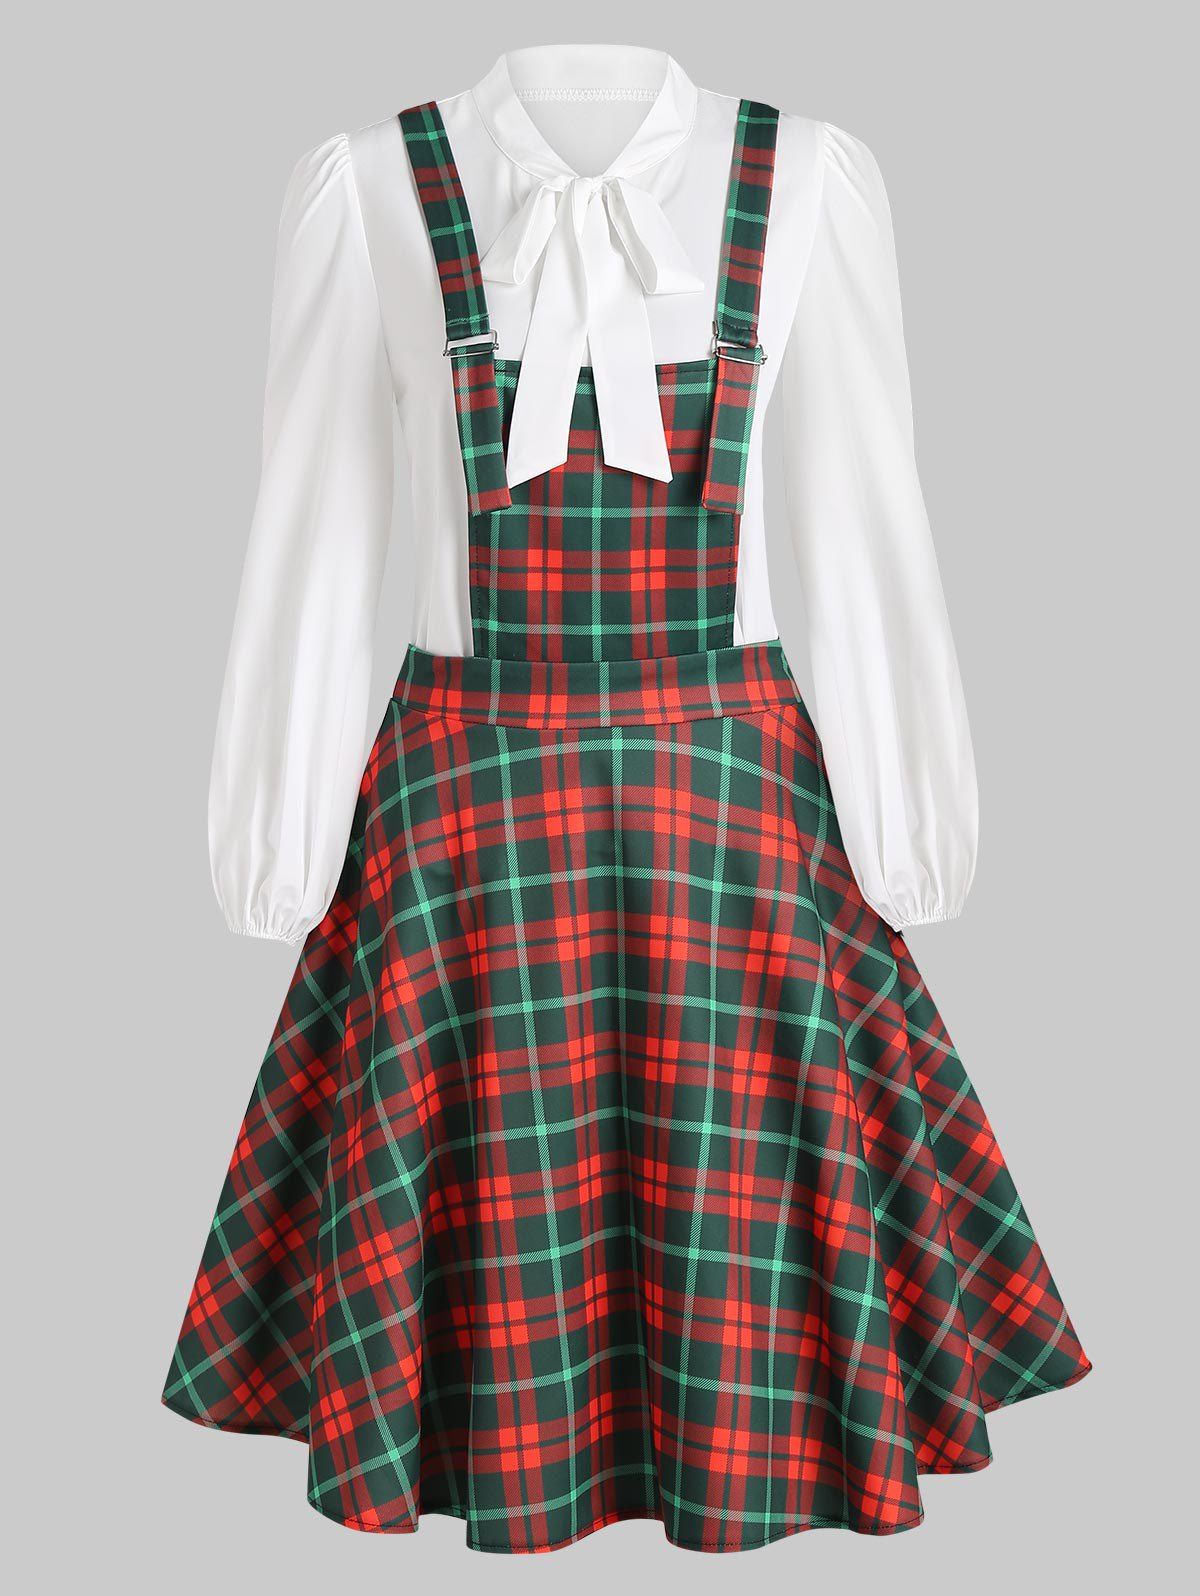 Knee Length Plaid Pinafore Dress with Bowknot Collar Blouse 